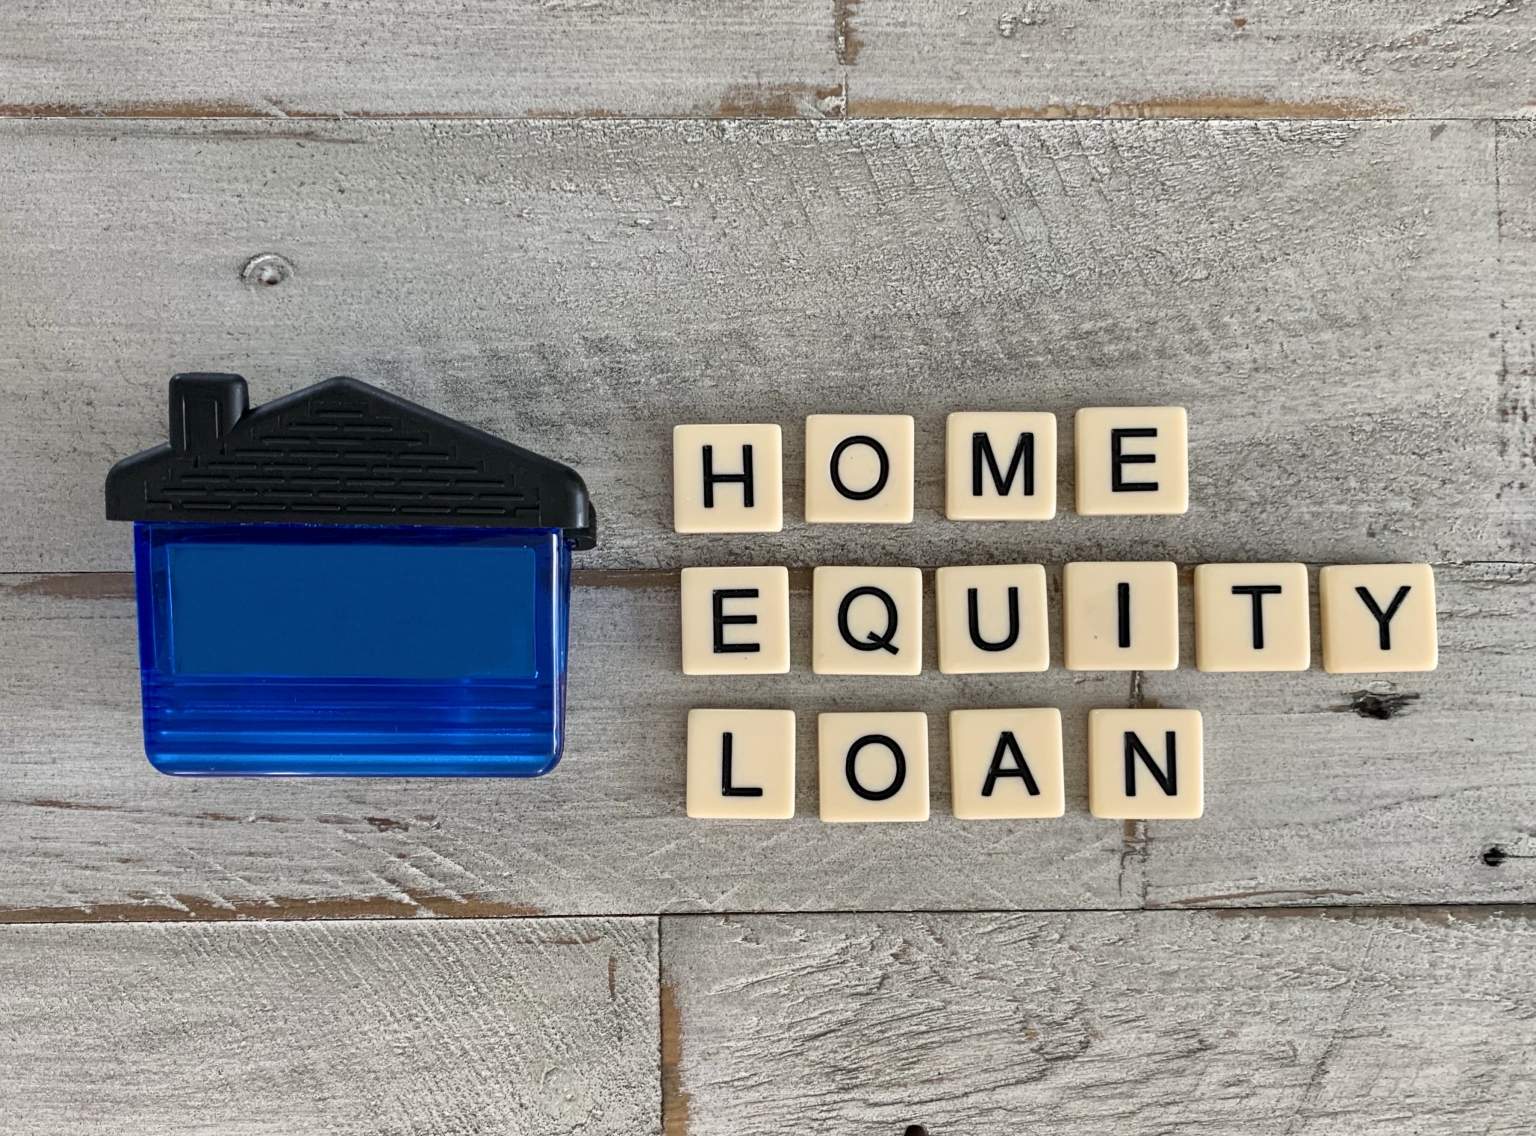 applying-for-a-home-equity-loan-what-to-consider-first-mortgage